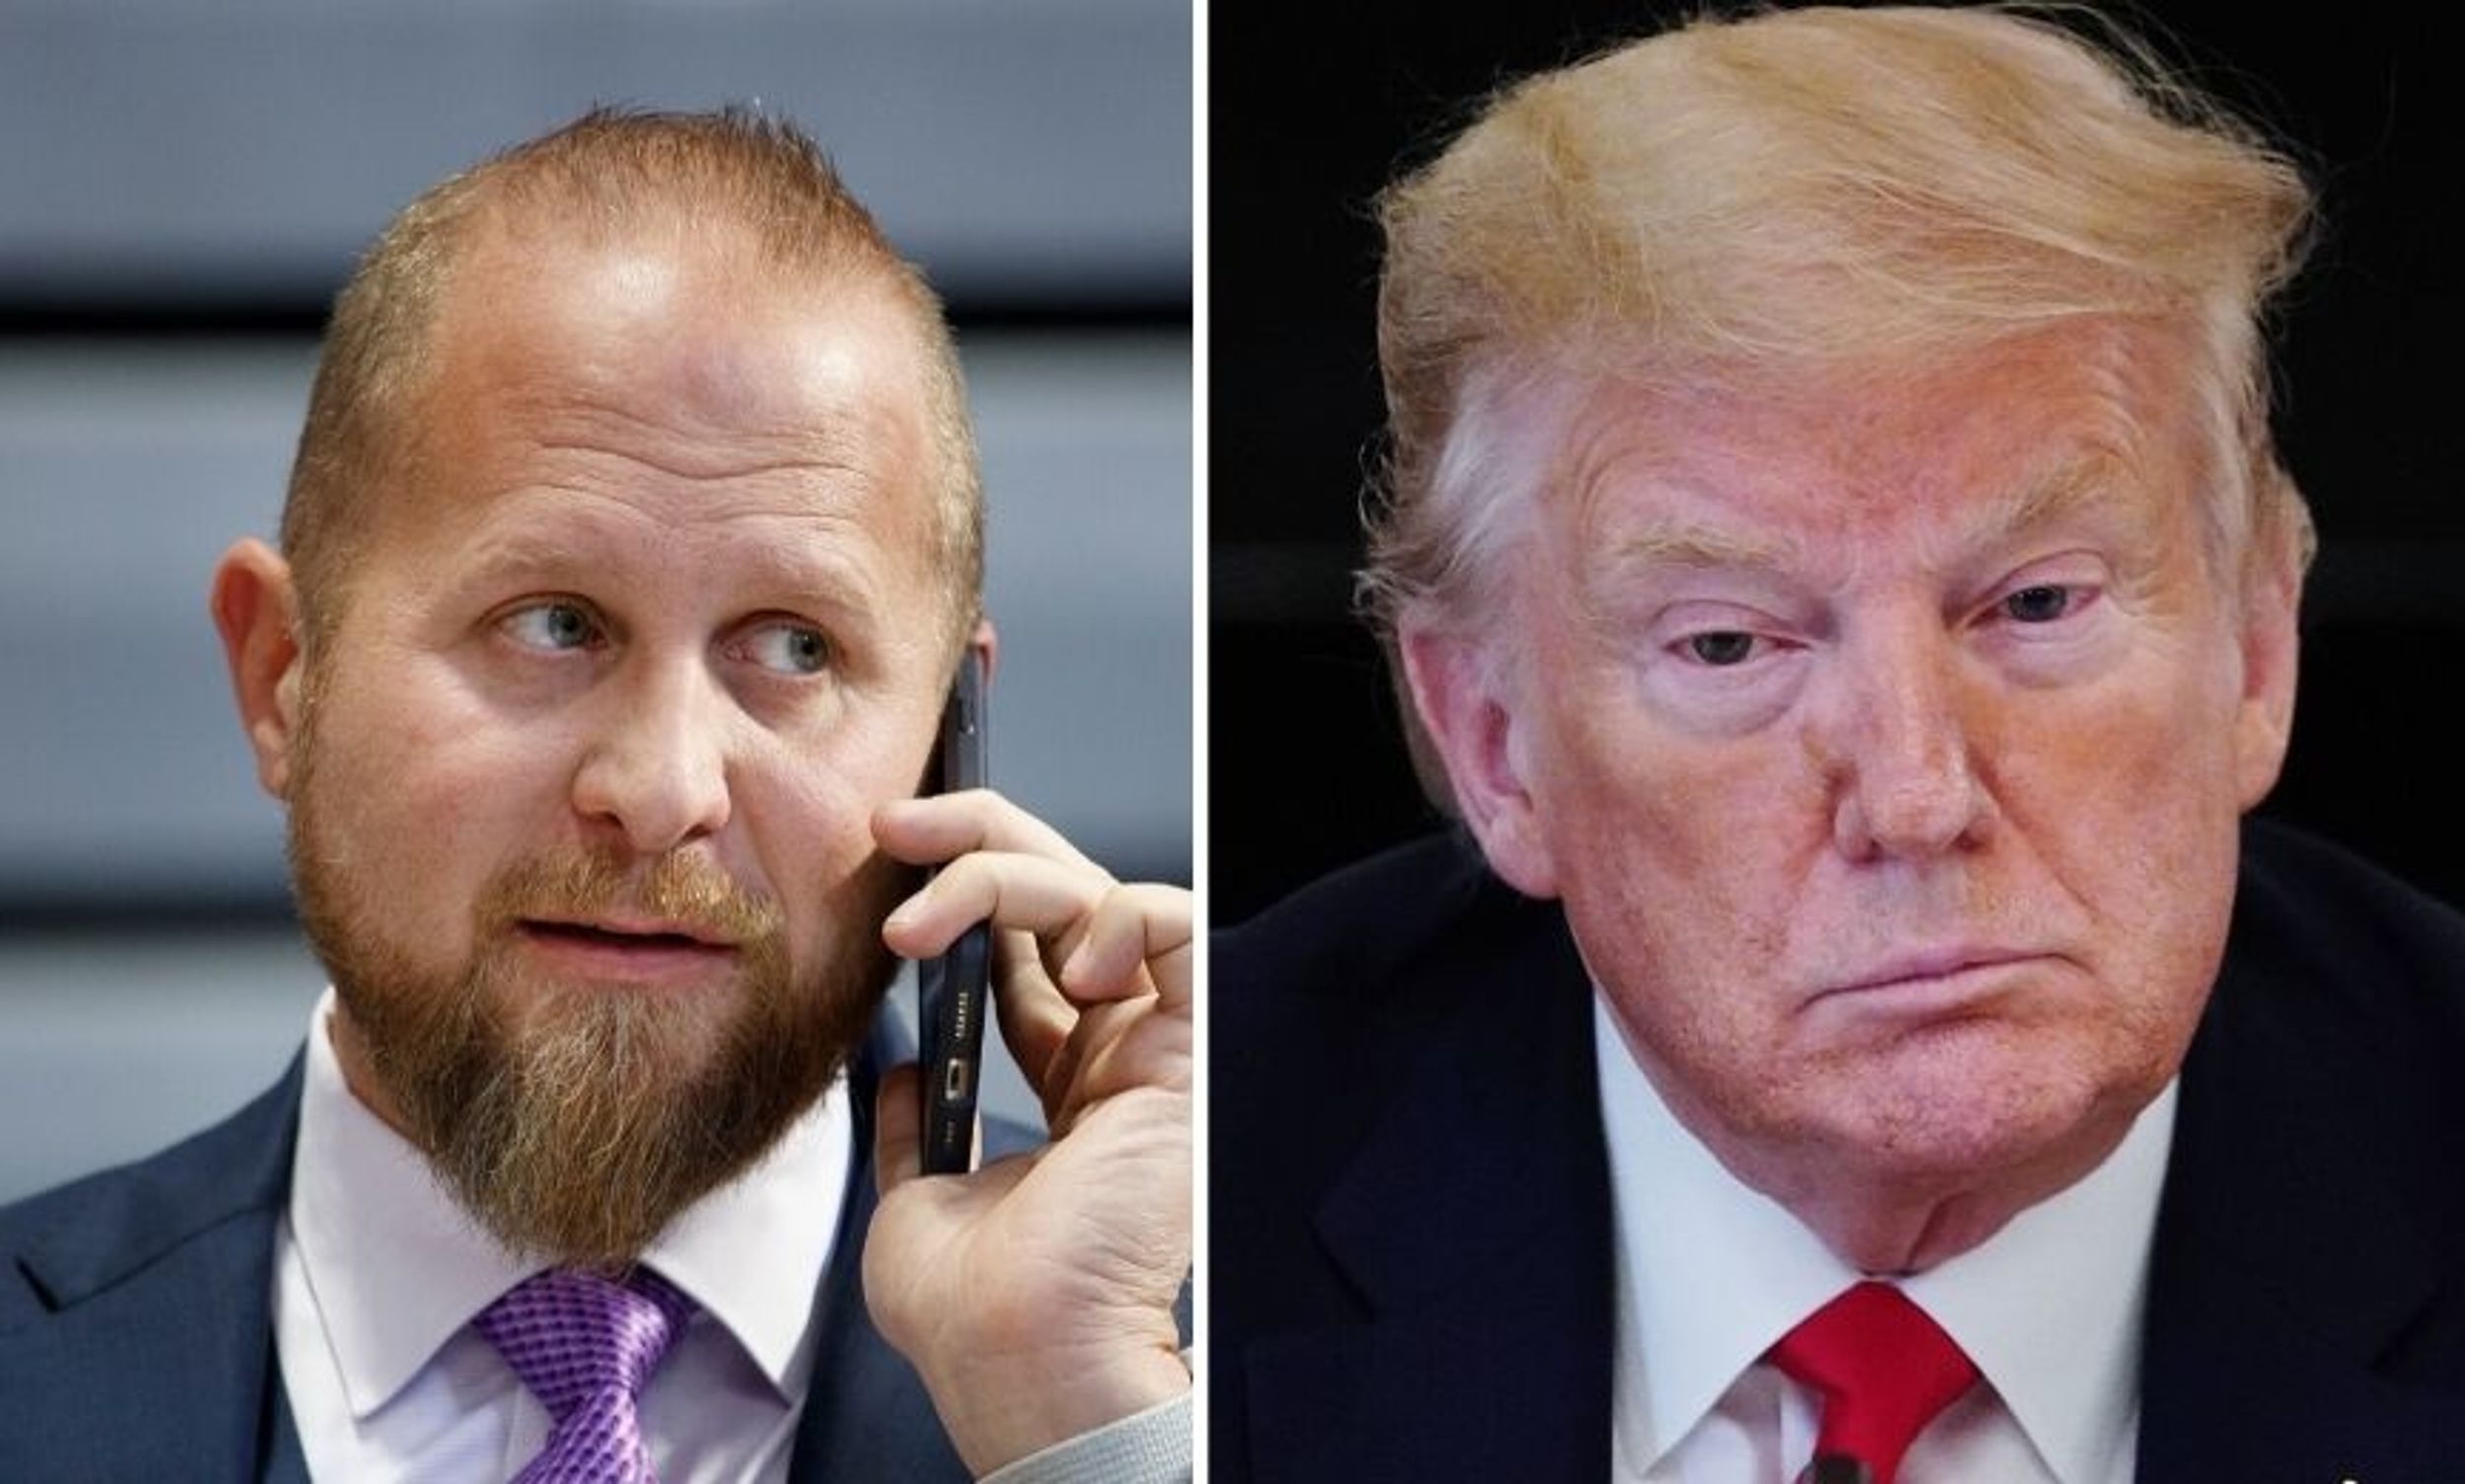 Enraged By Falling Poll Numbers, Trump Reportedly Threatened to Sue His Own Campaign Manager